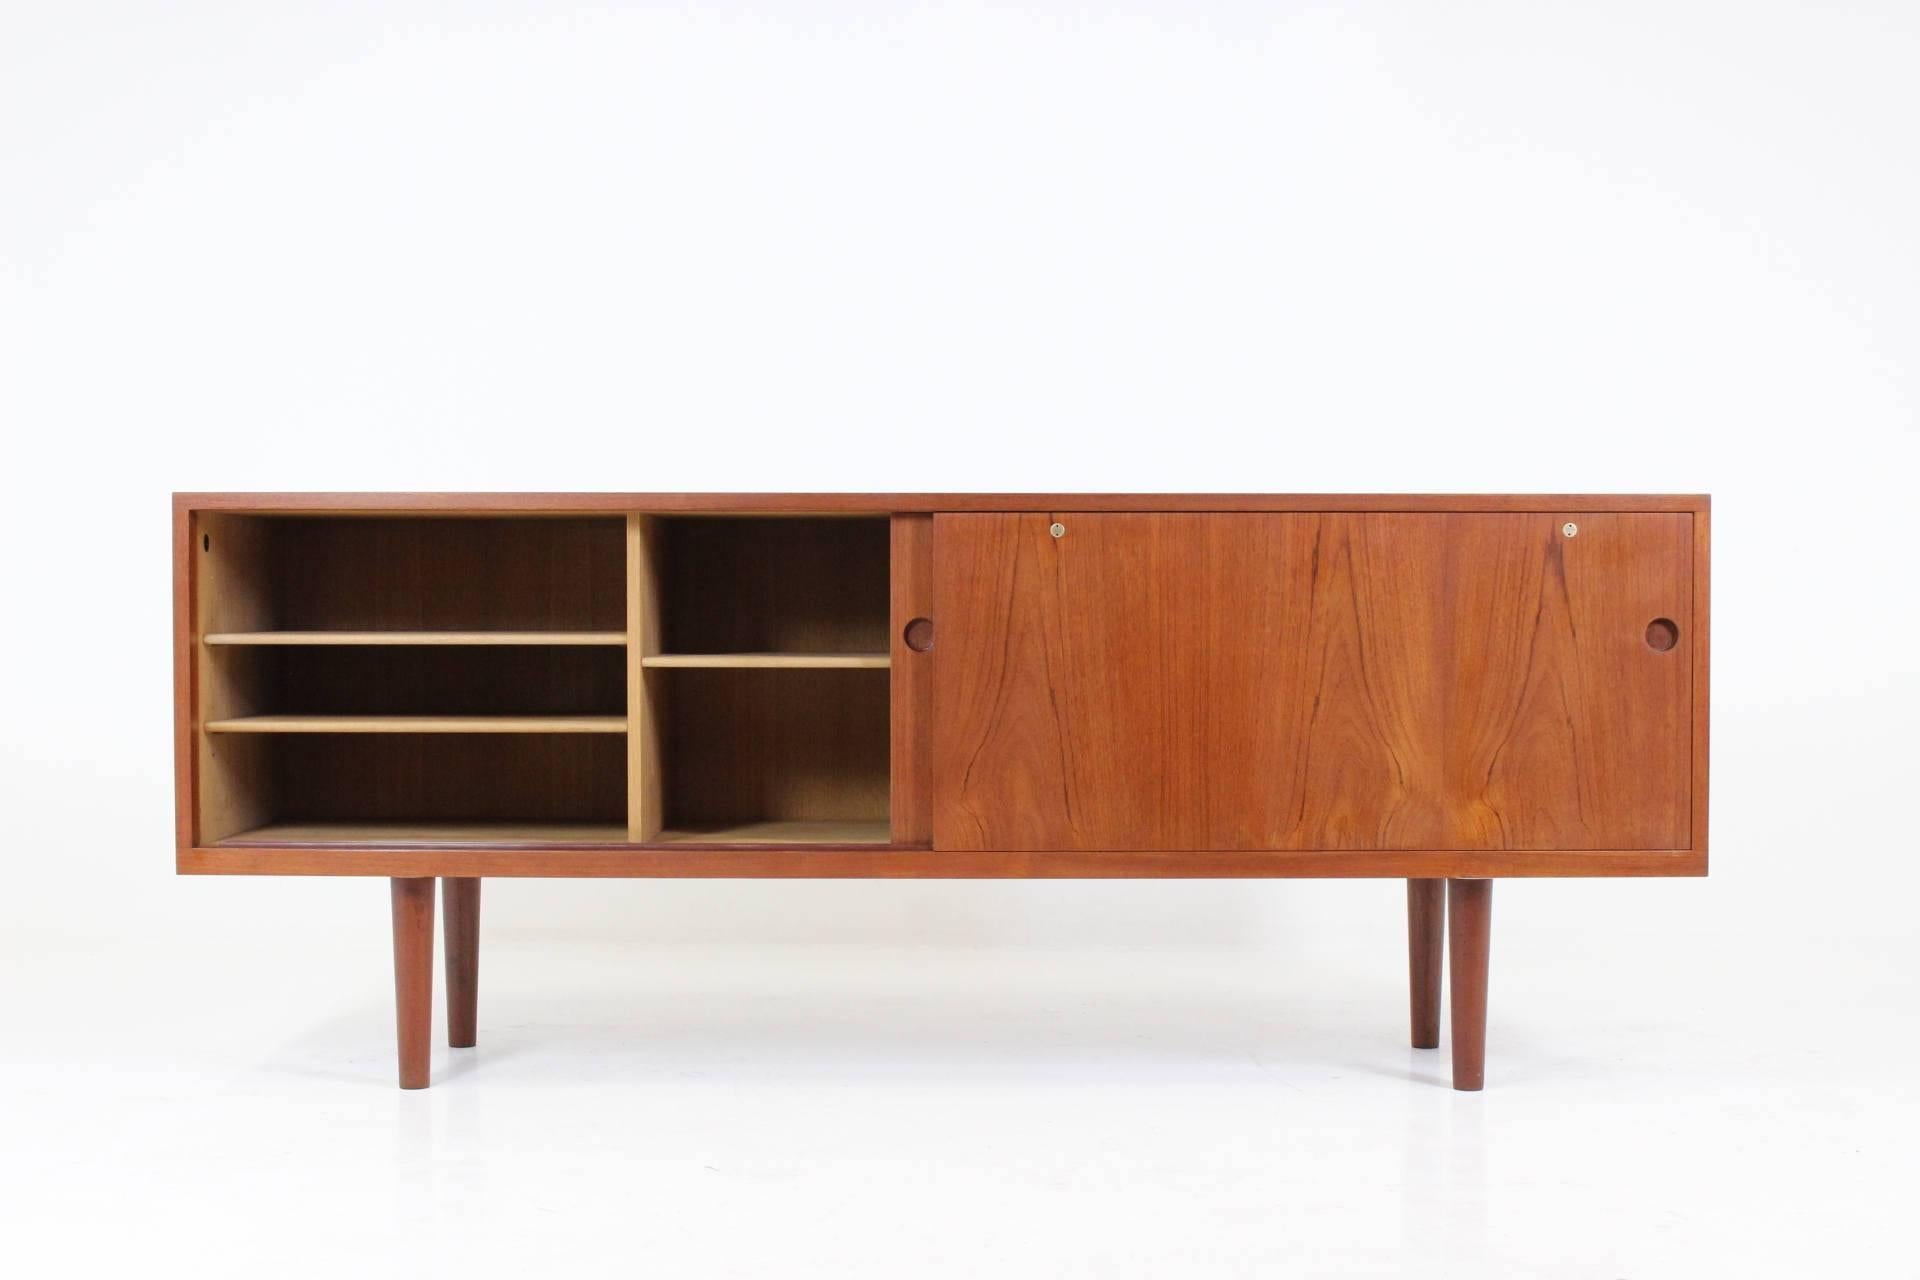 A teak sideboard, model 26, designed by Hans J. Wegner for RY Mobler in Denmark, circa 1965. This simple sideboard has two sliding doors with shelves and four drawers inside. The item was carefully restored.